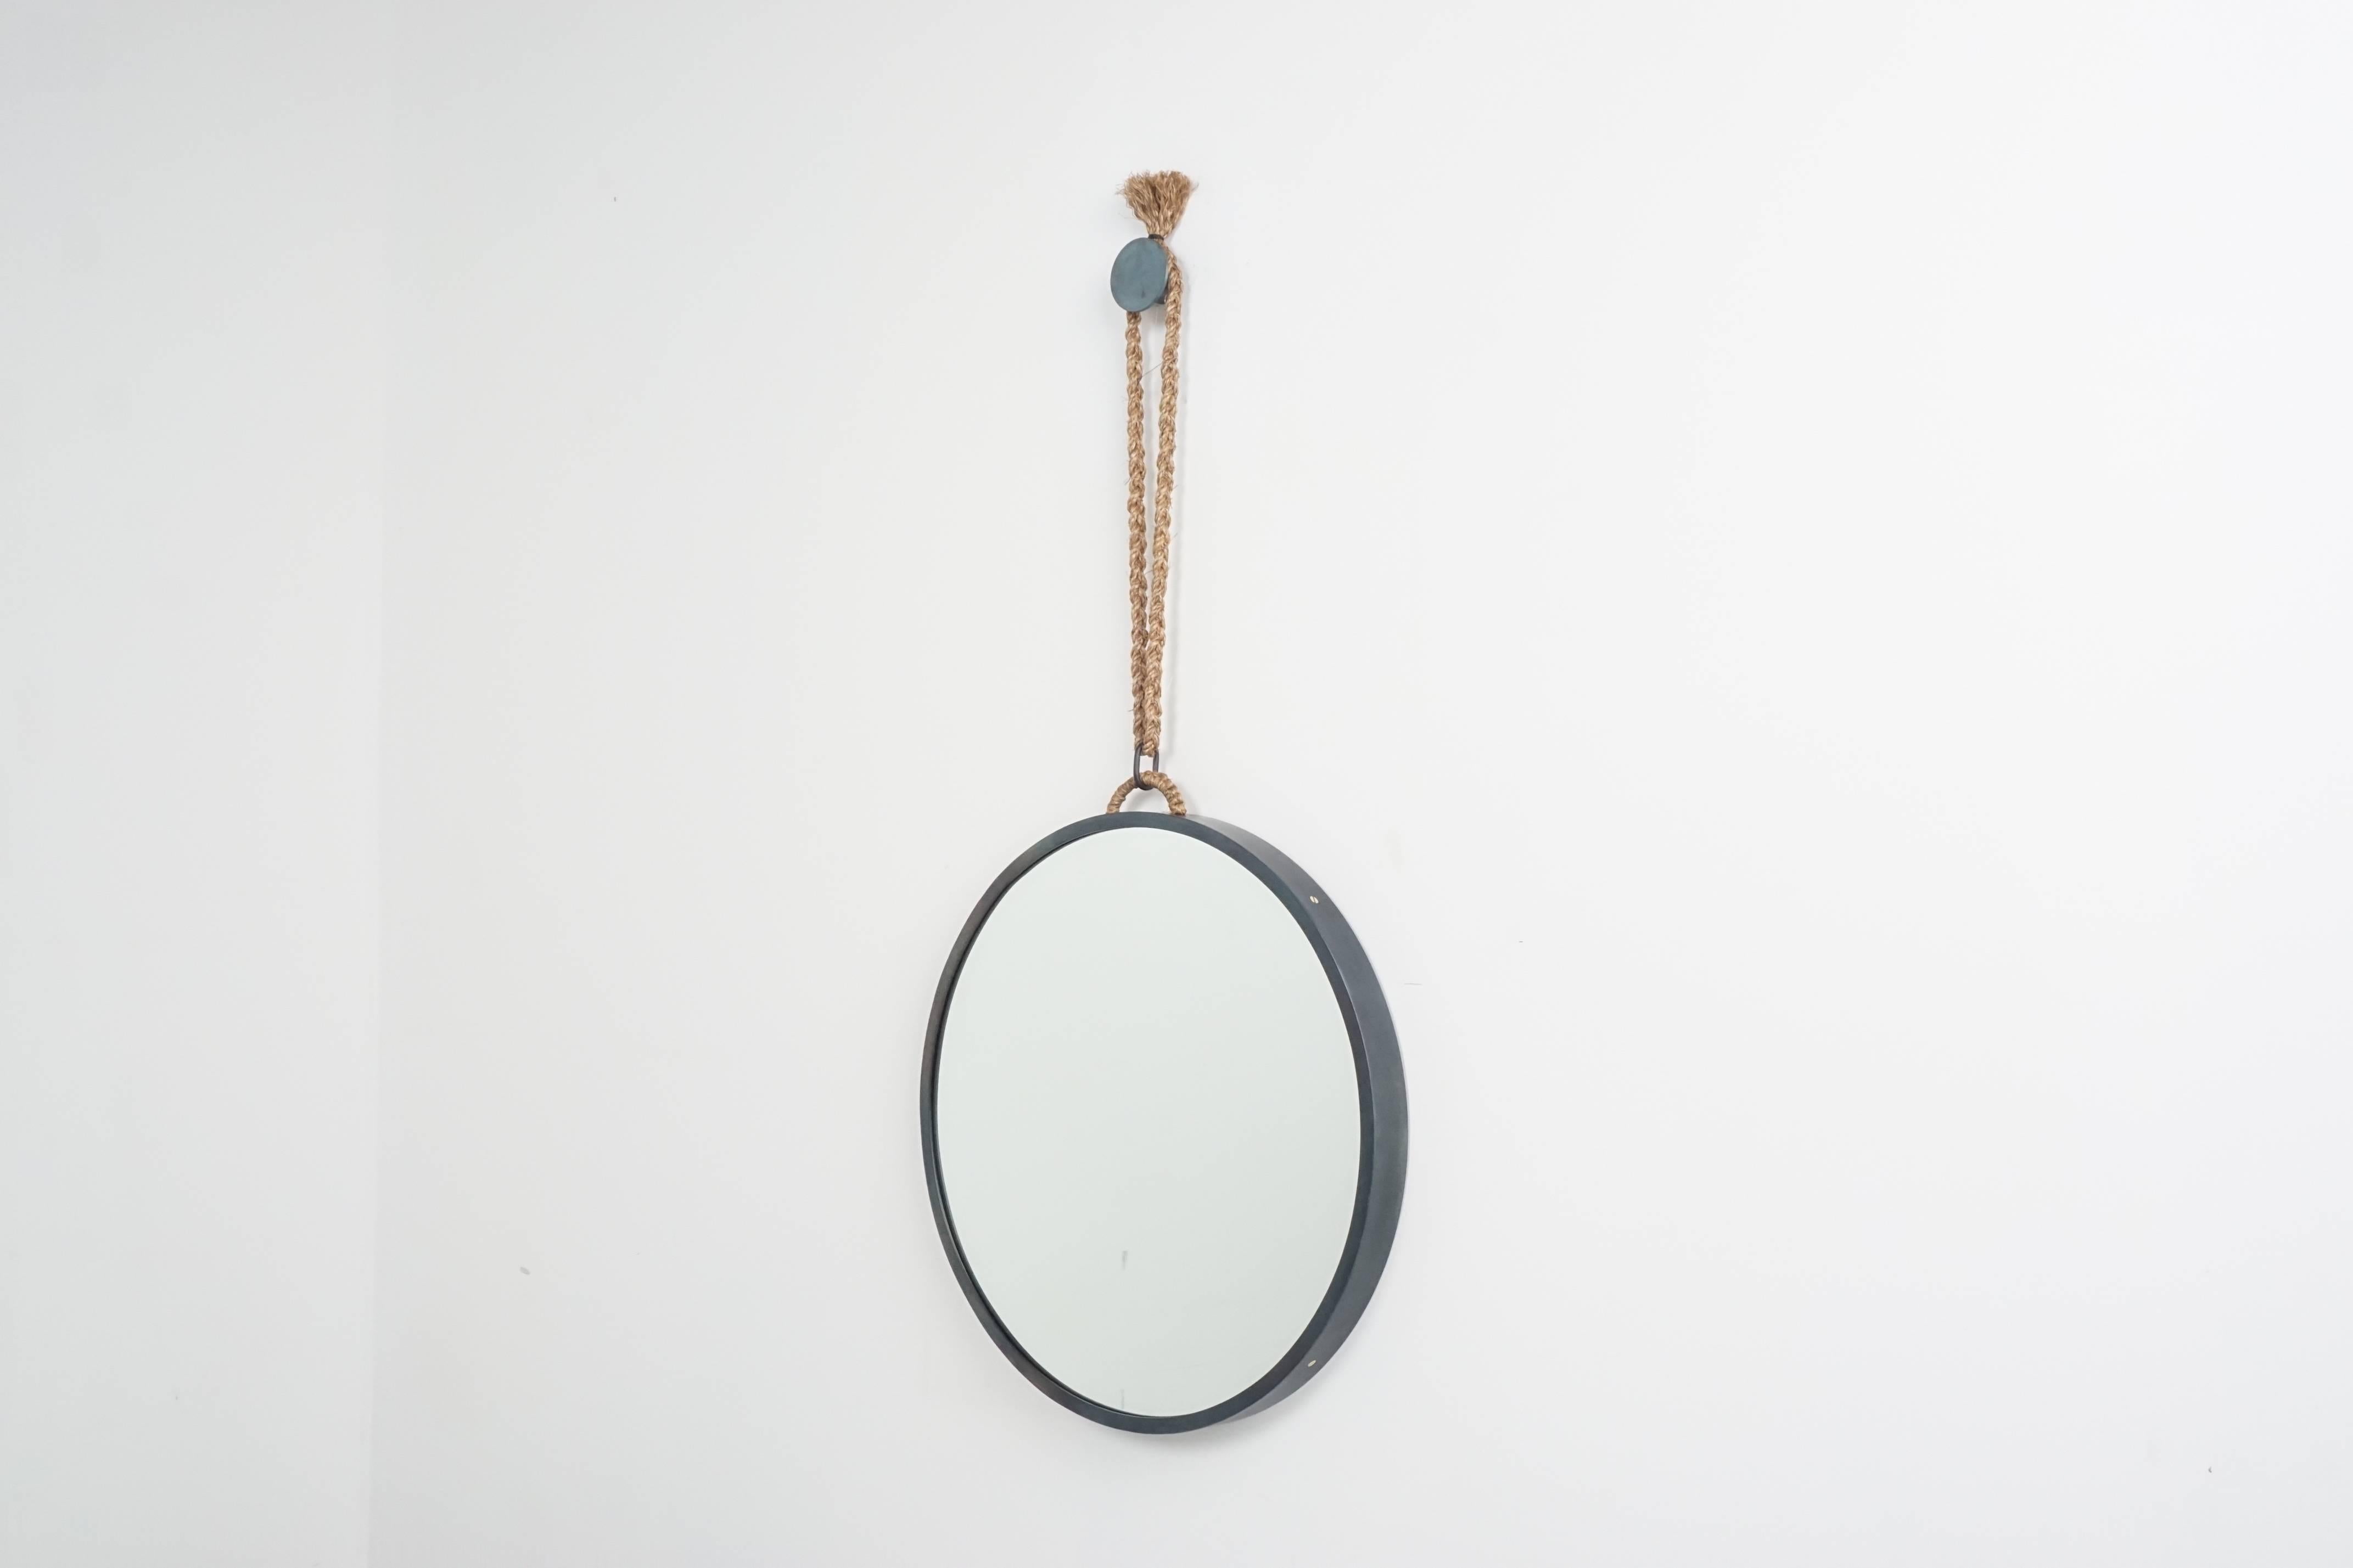 Black steel mirror designed by Orange with simple hemp detailing and matching round steel disc to hang.

24